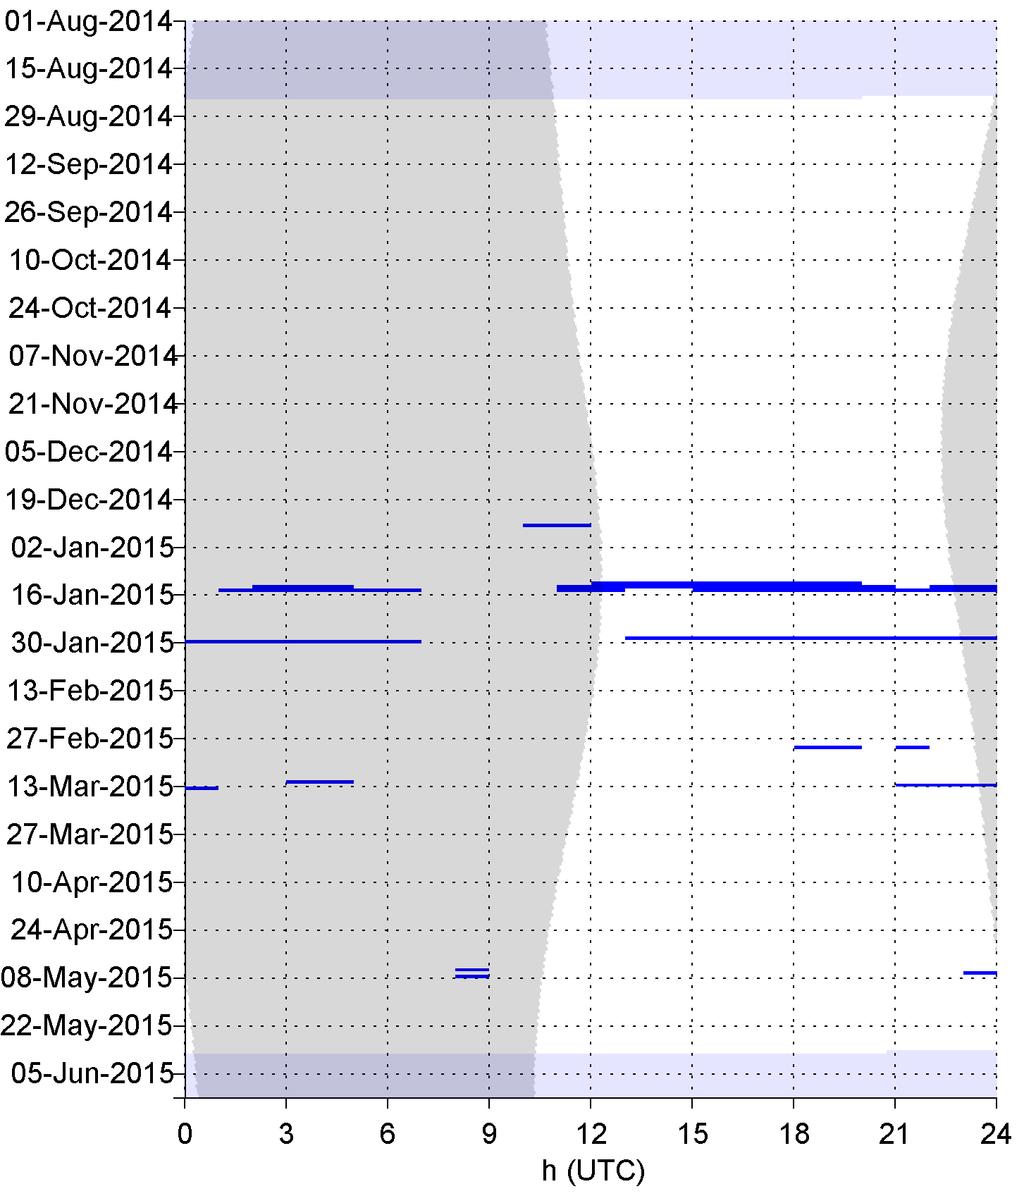 Figure 32. Fin whale 20 Hz calls in hourly bins (blue bars) at site D.